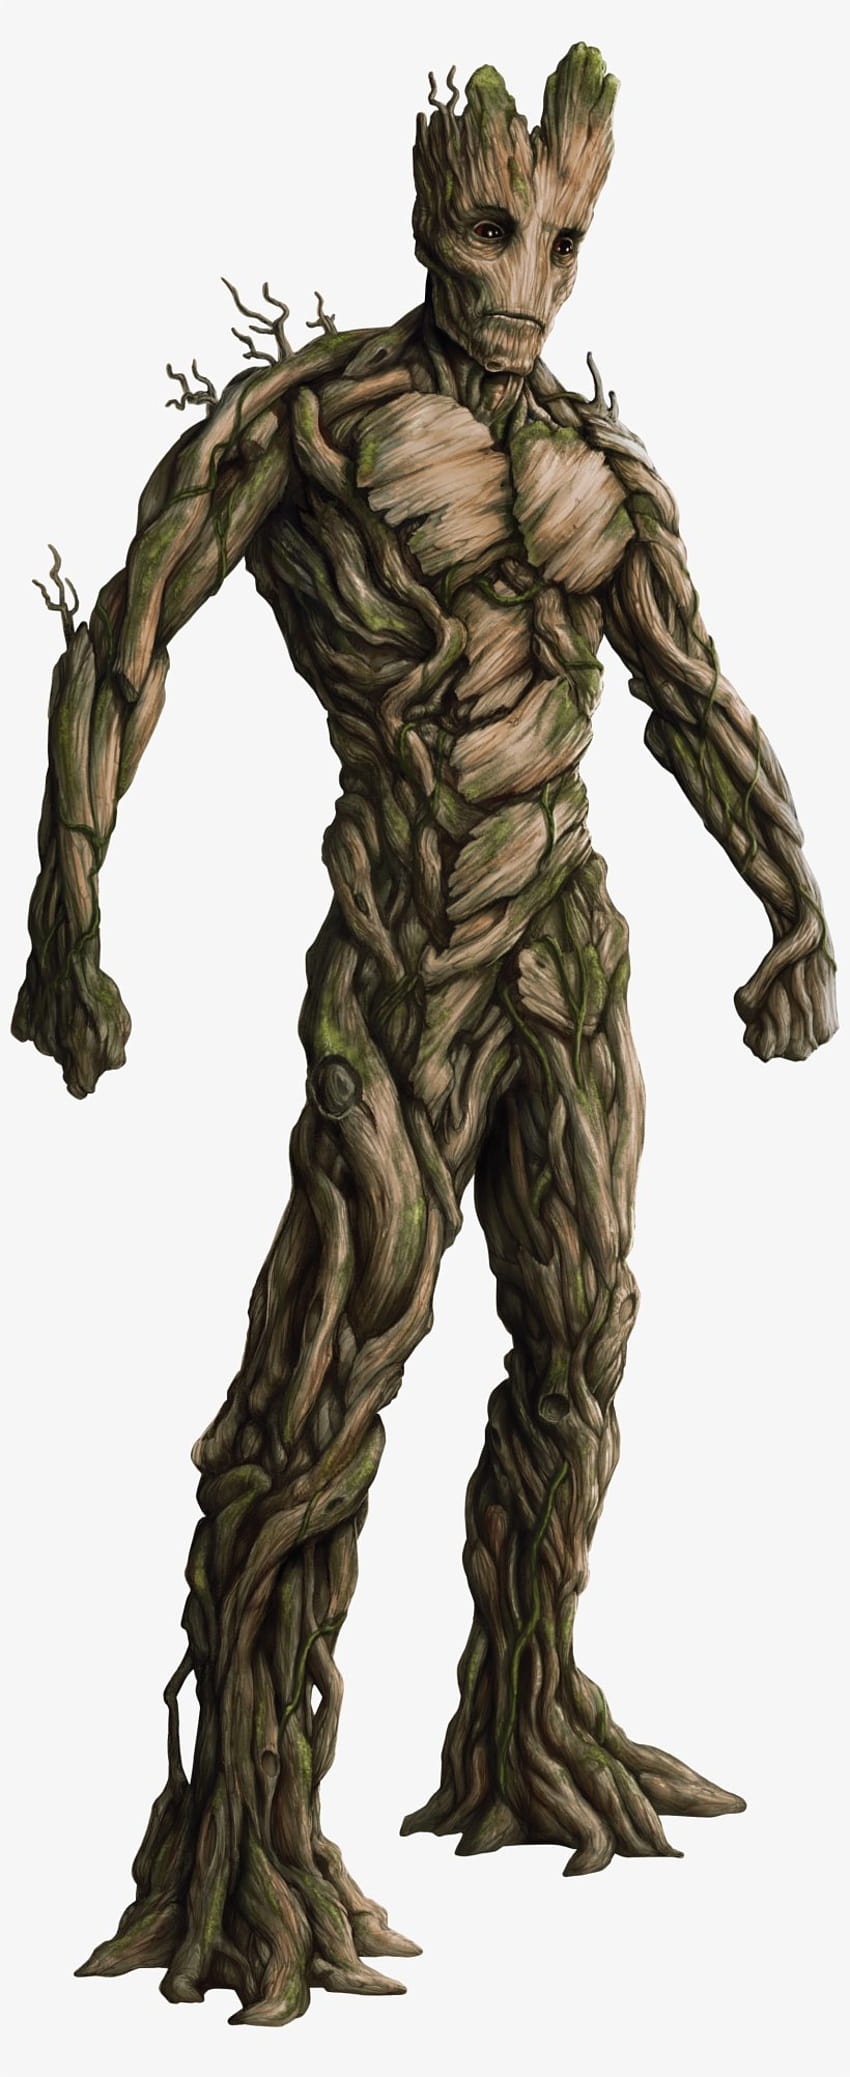 1920x1080px, 1080P Free download | Groot PNG Transparent, adult groot ...